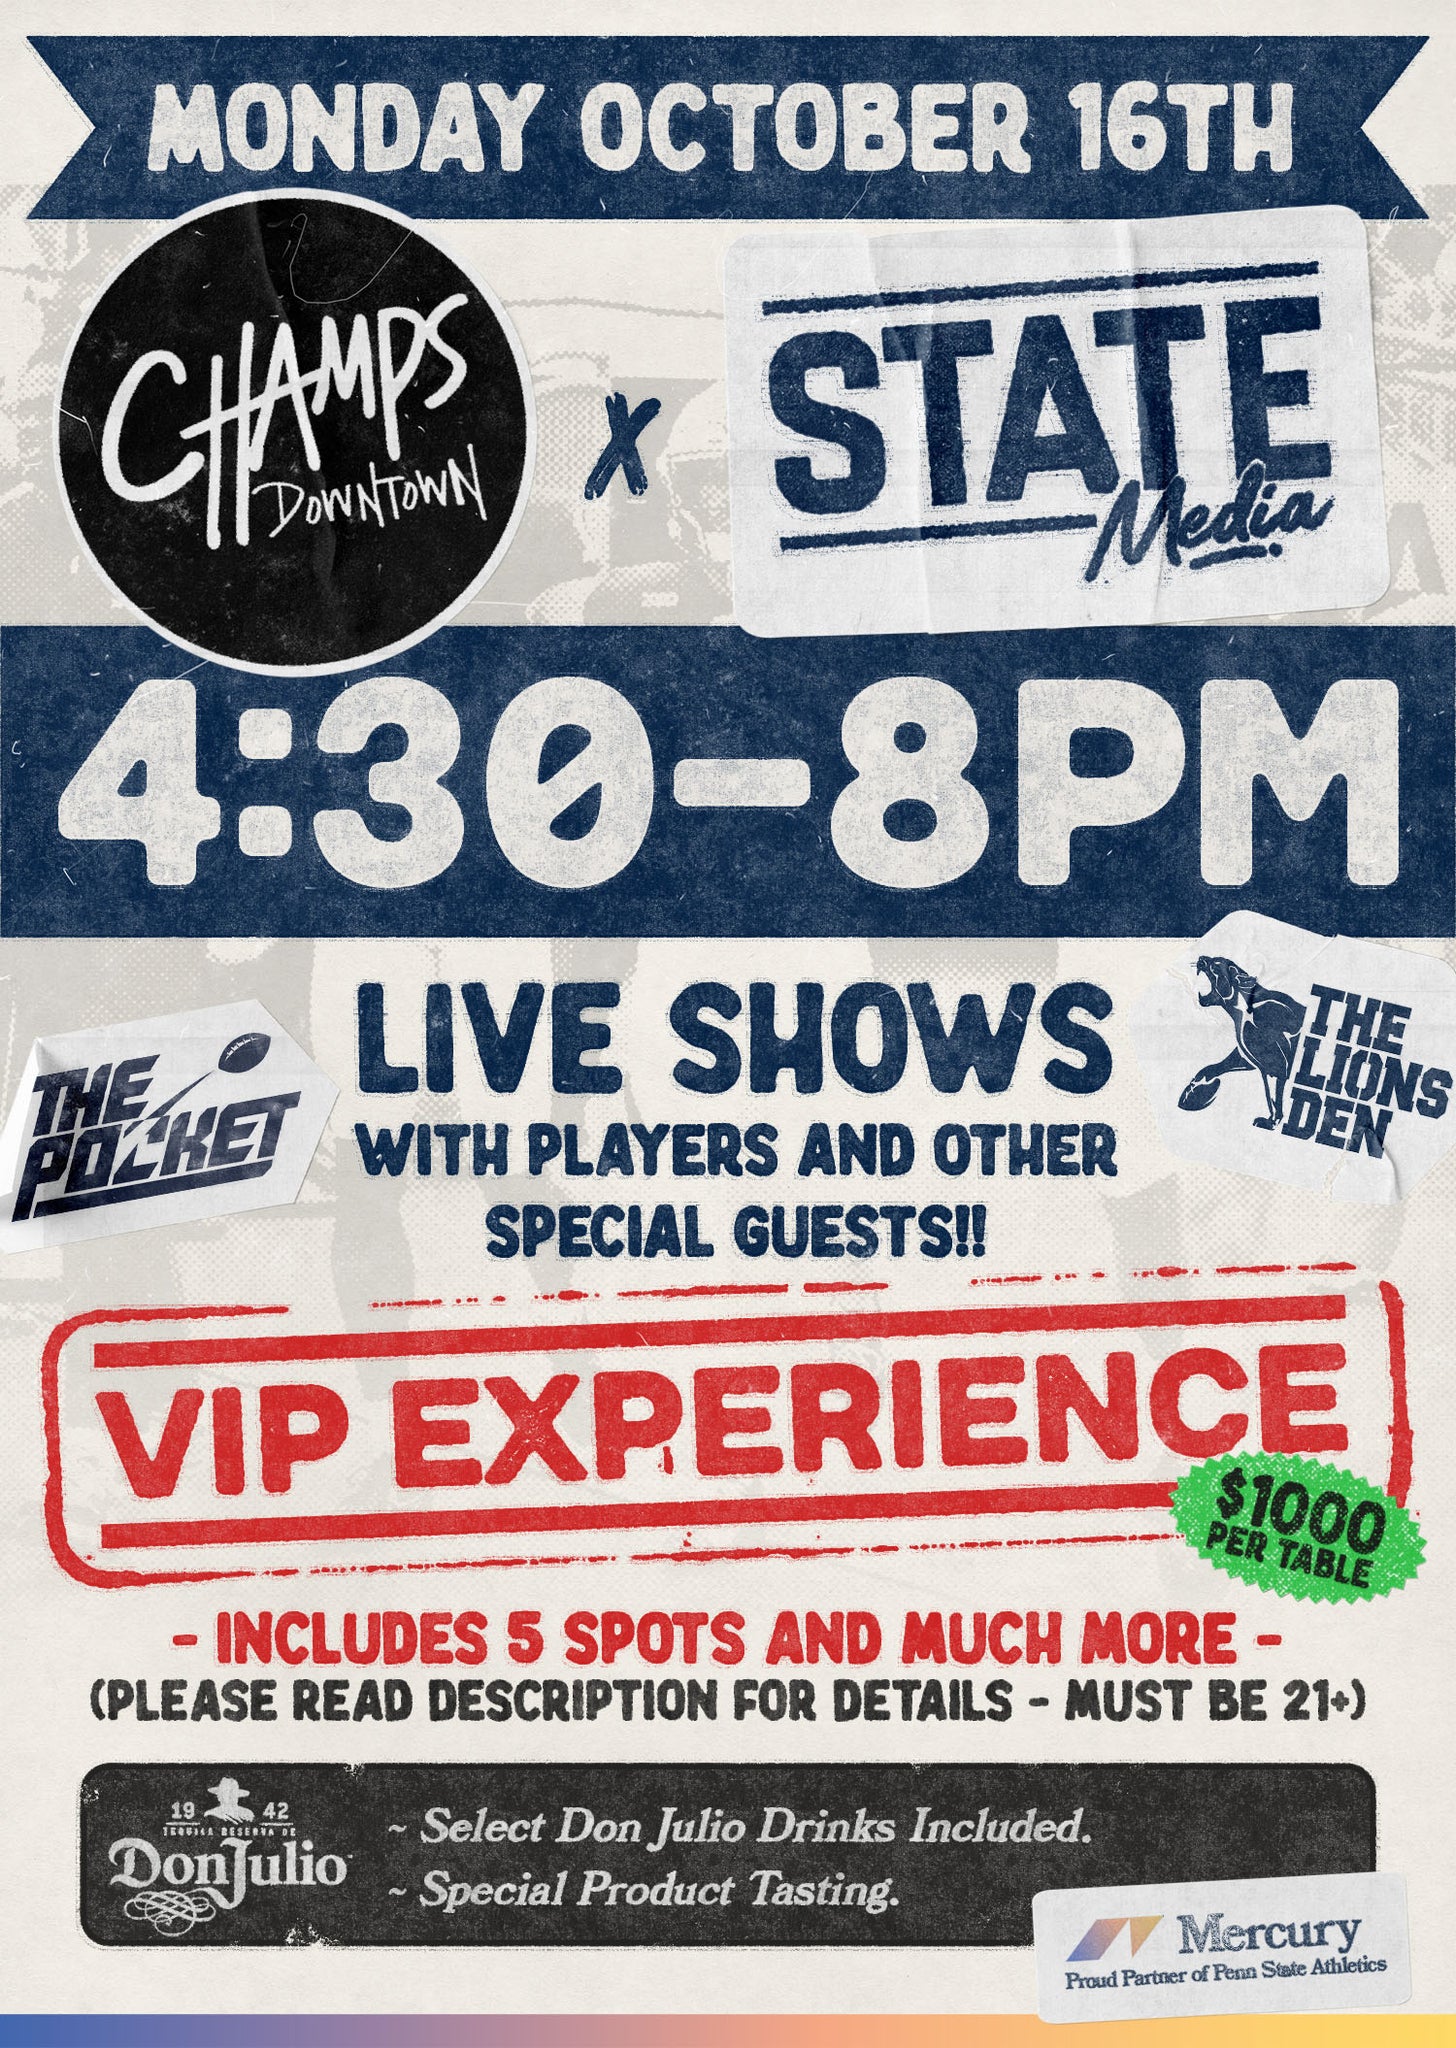 State Media Live Show at Champs Downtown | VIP Experience